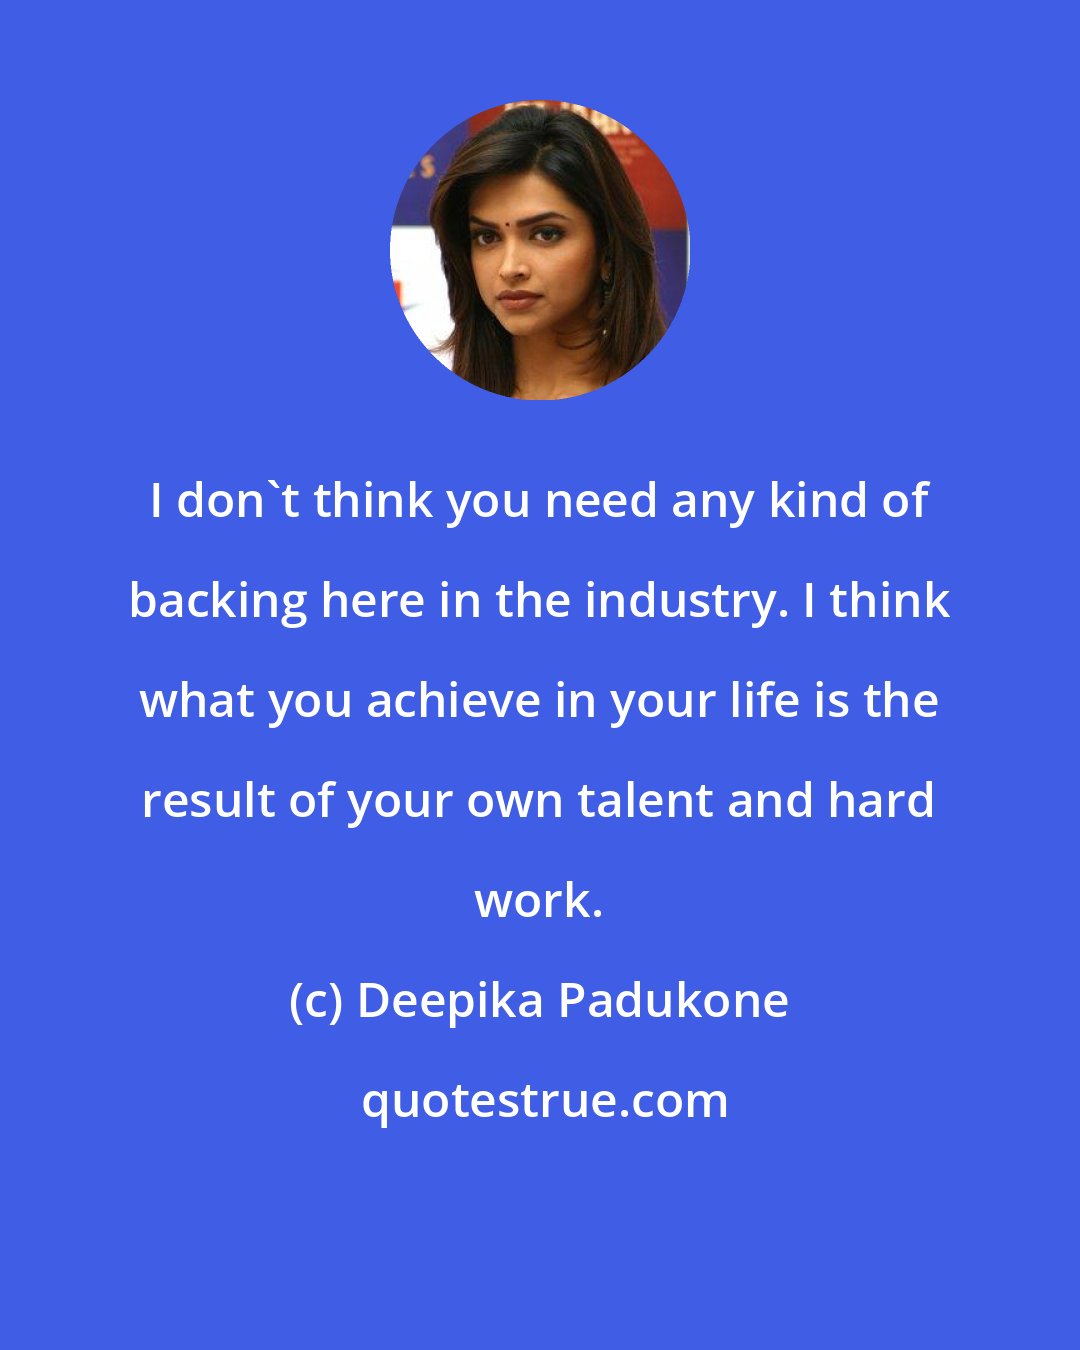 Deepika Padukone: I don't think you need any kind of backing here in the industry. I think what you achieve in your life is the result of your own talent and hard work.